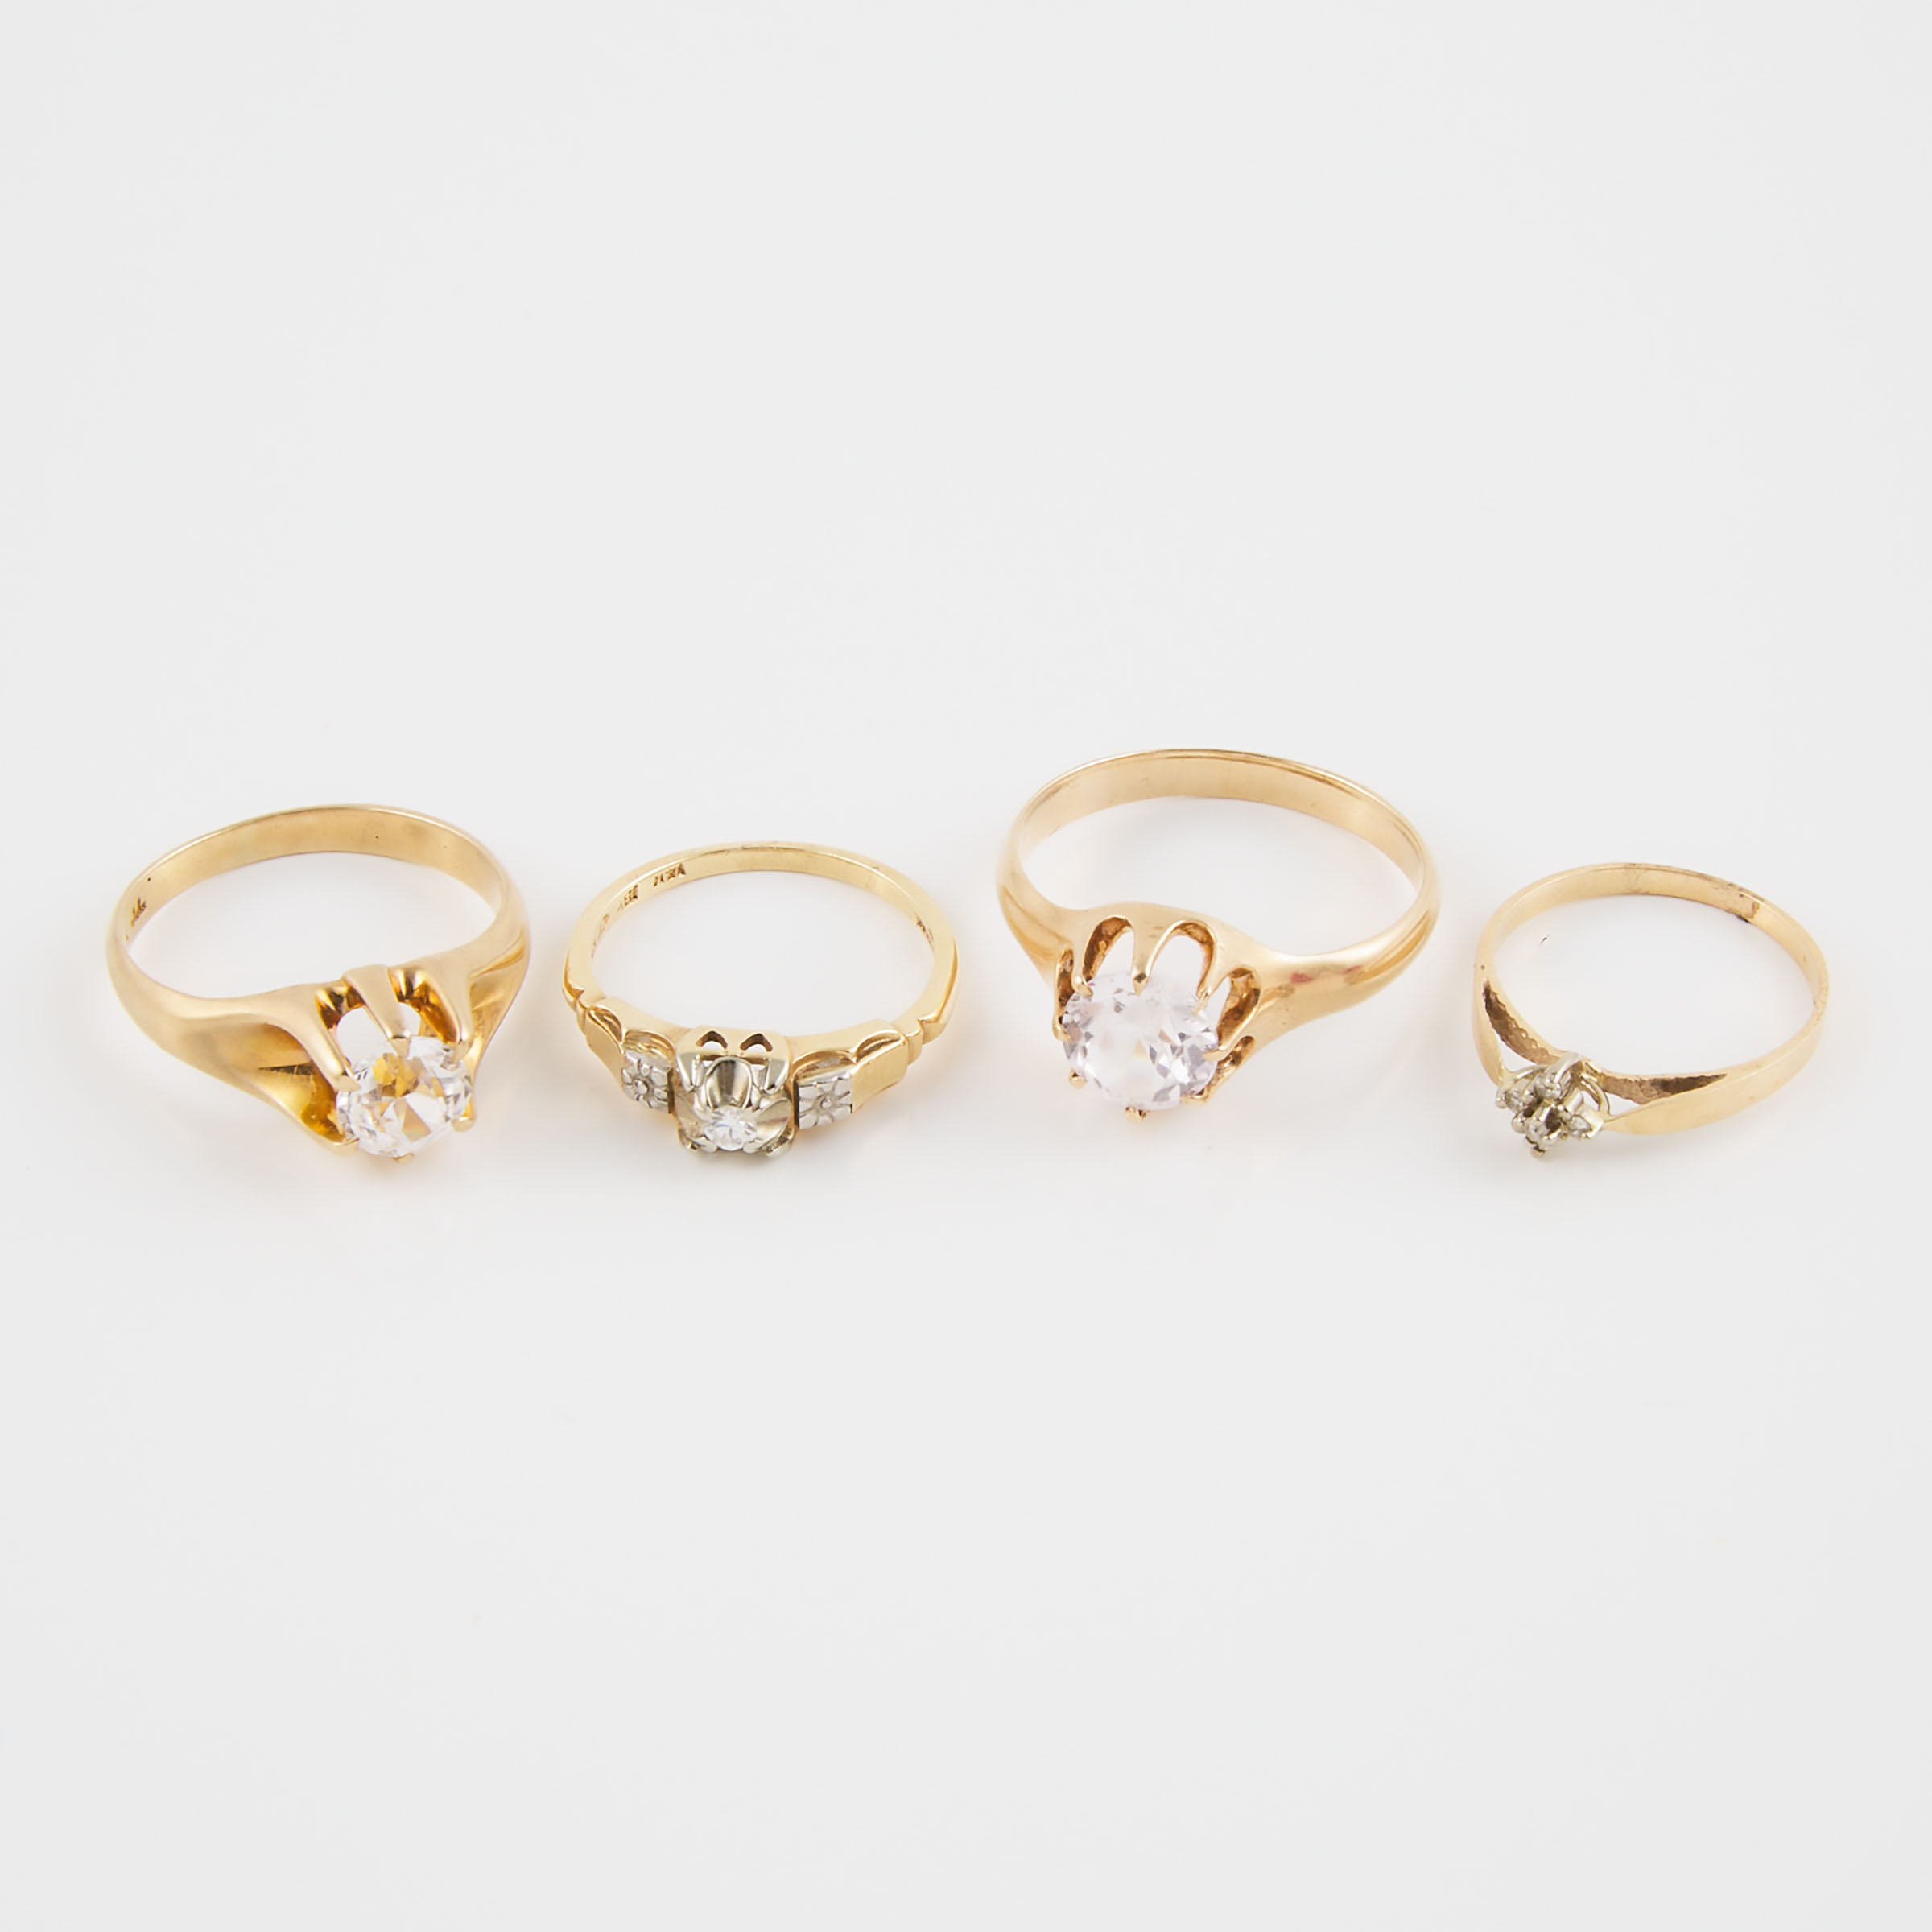 1 x 14k/18k And 3 x 10k Yellow And White Gold Rings